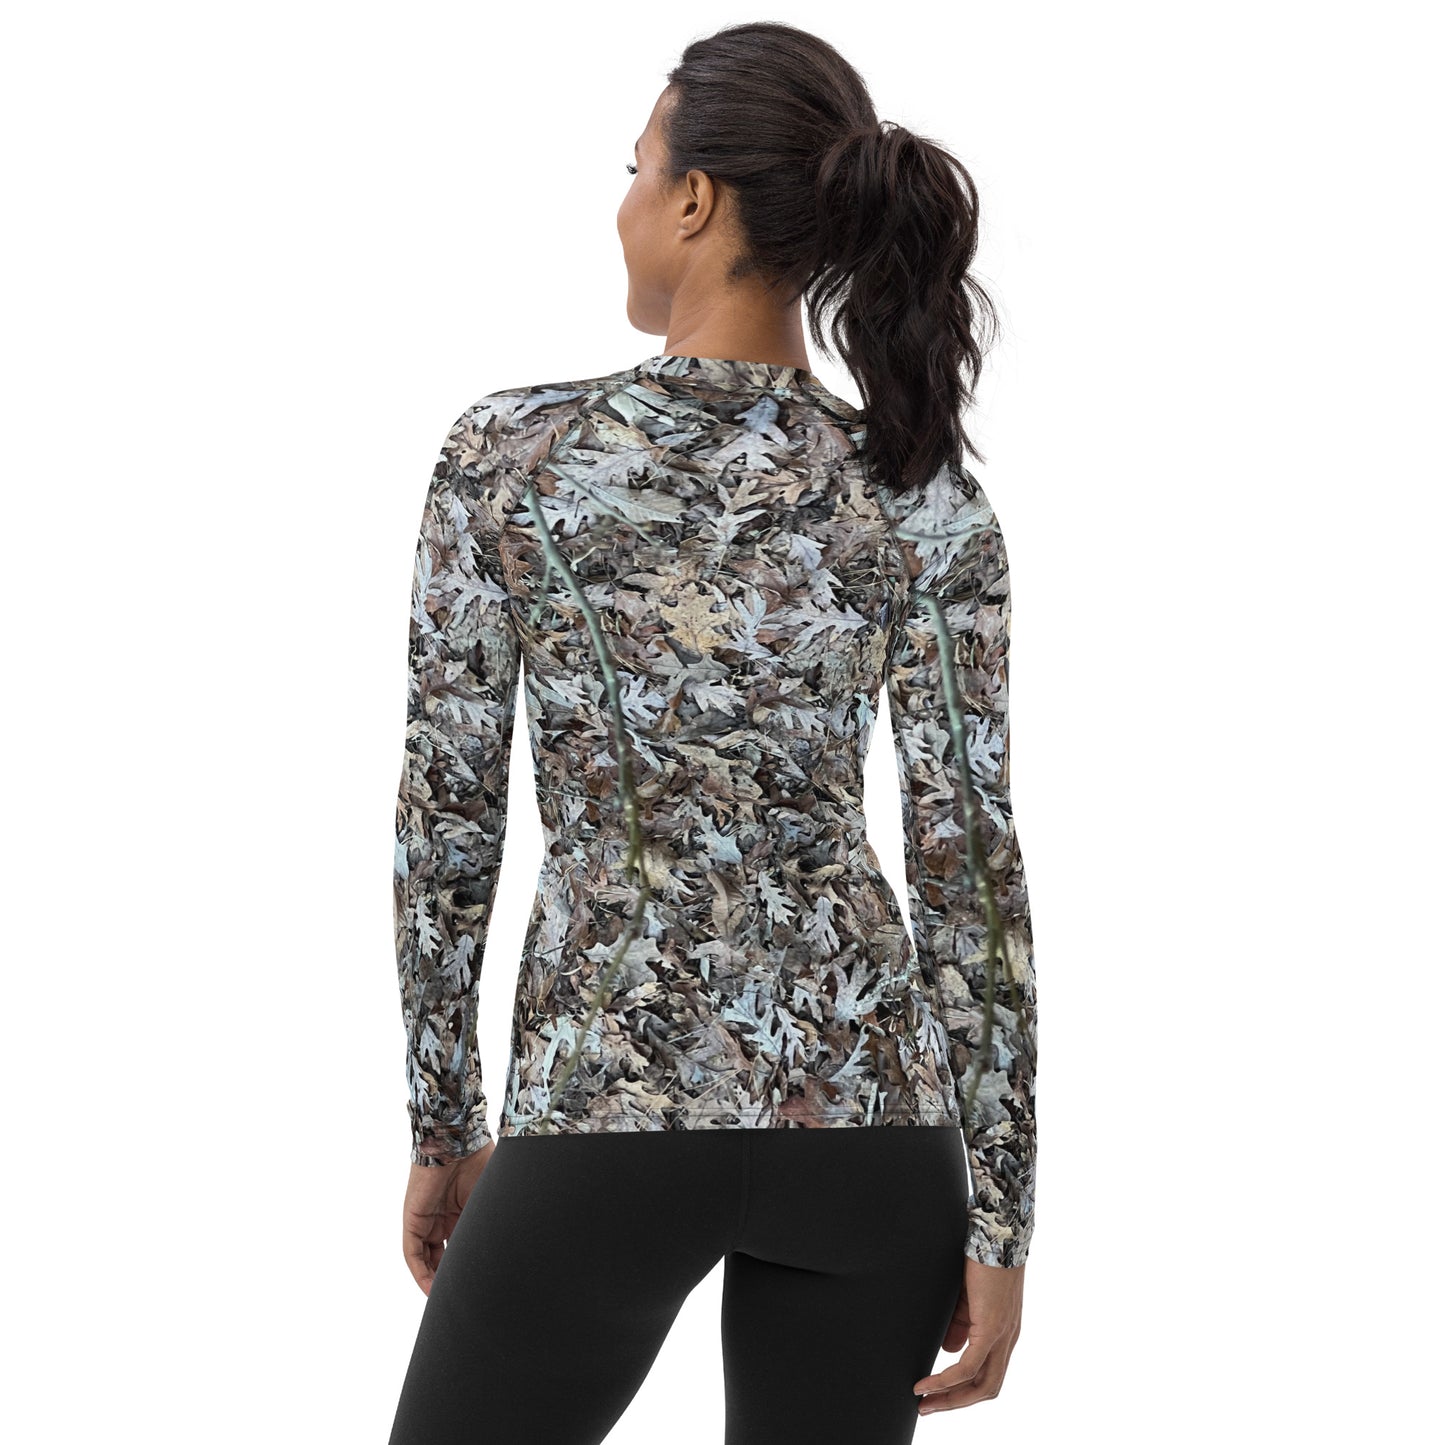 Southern Cameaux Ground Cover Women's Rash Guard